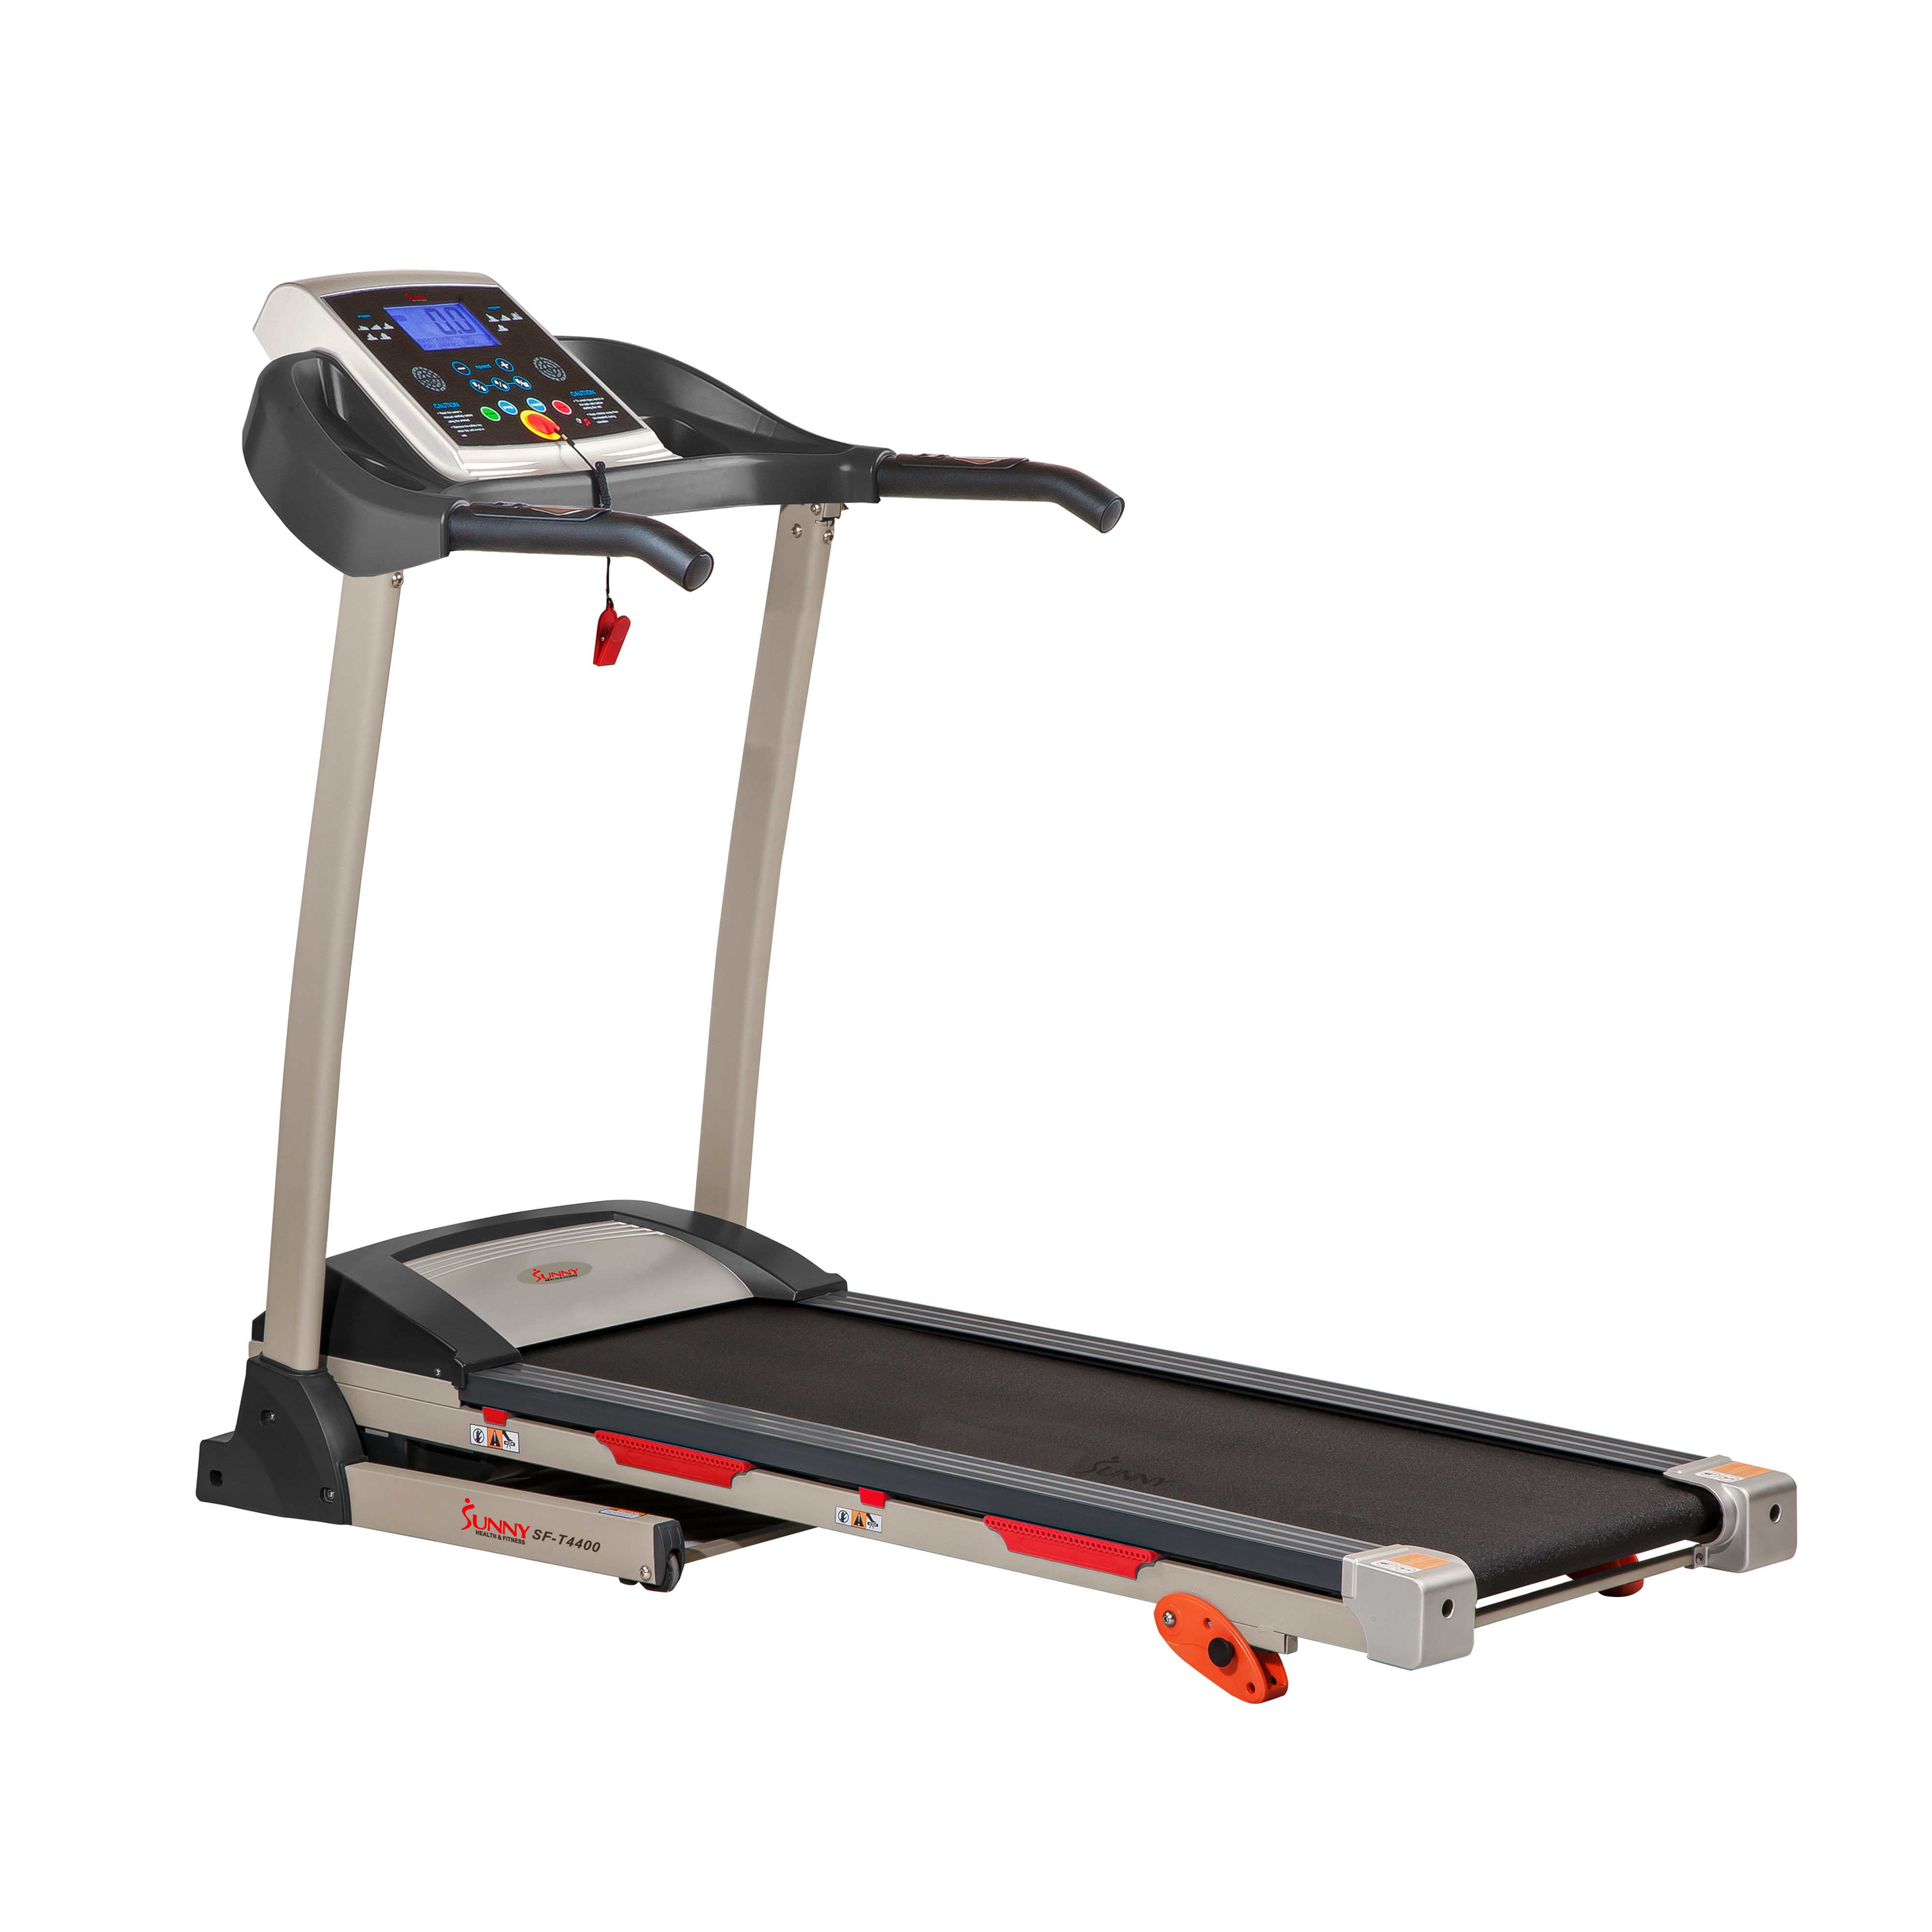 Sunny Health & Fitness Treadmill with Manual Incline, Pulse Sensors, Folding, LCD Monitor for Exercise SF-T4400 - image 4 of 13